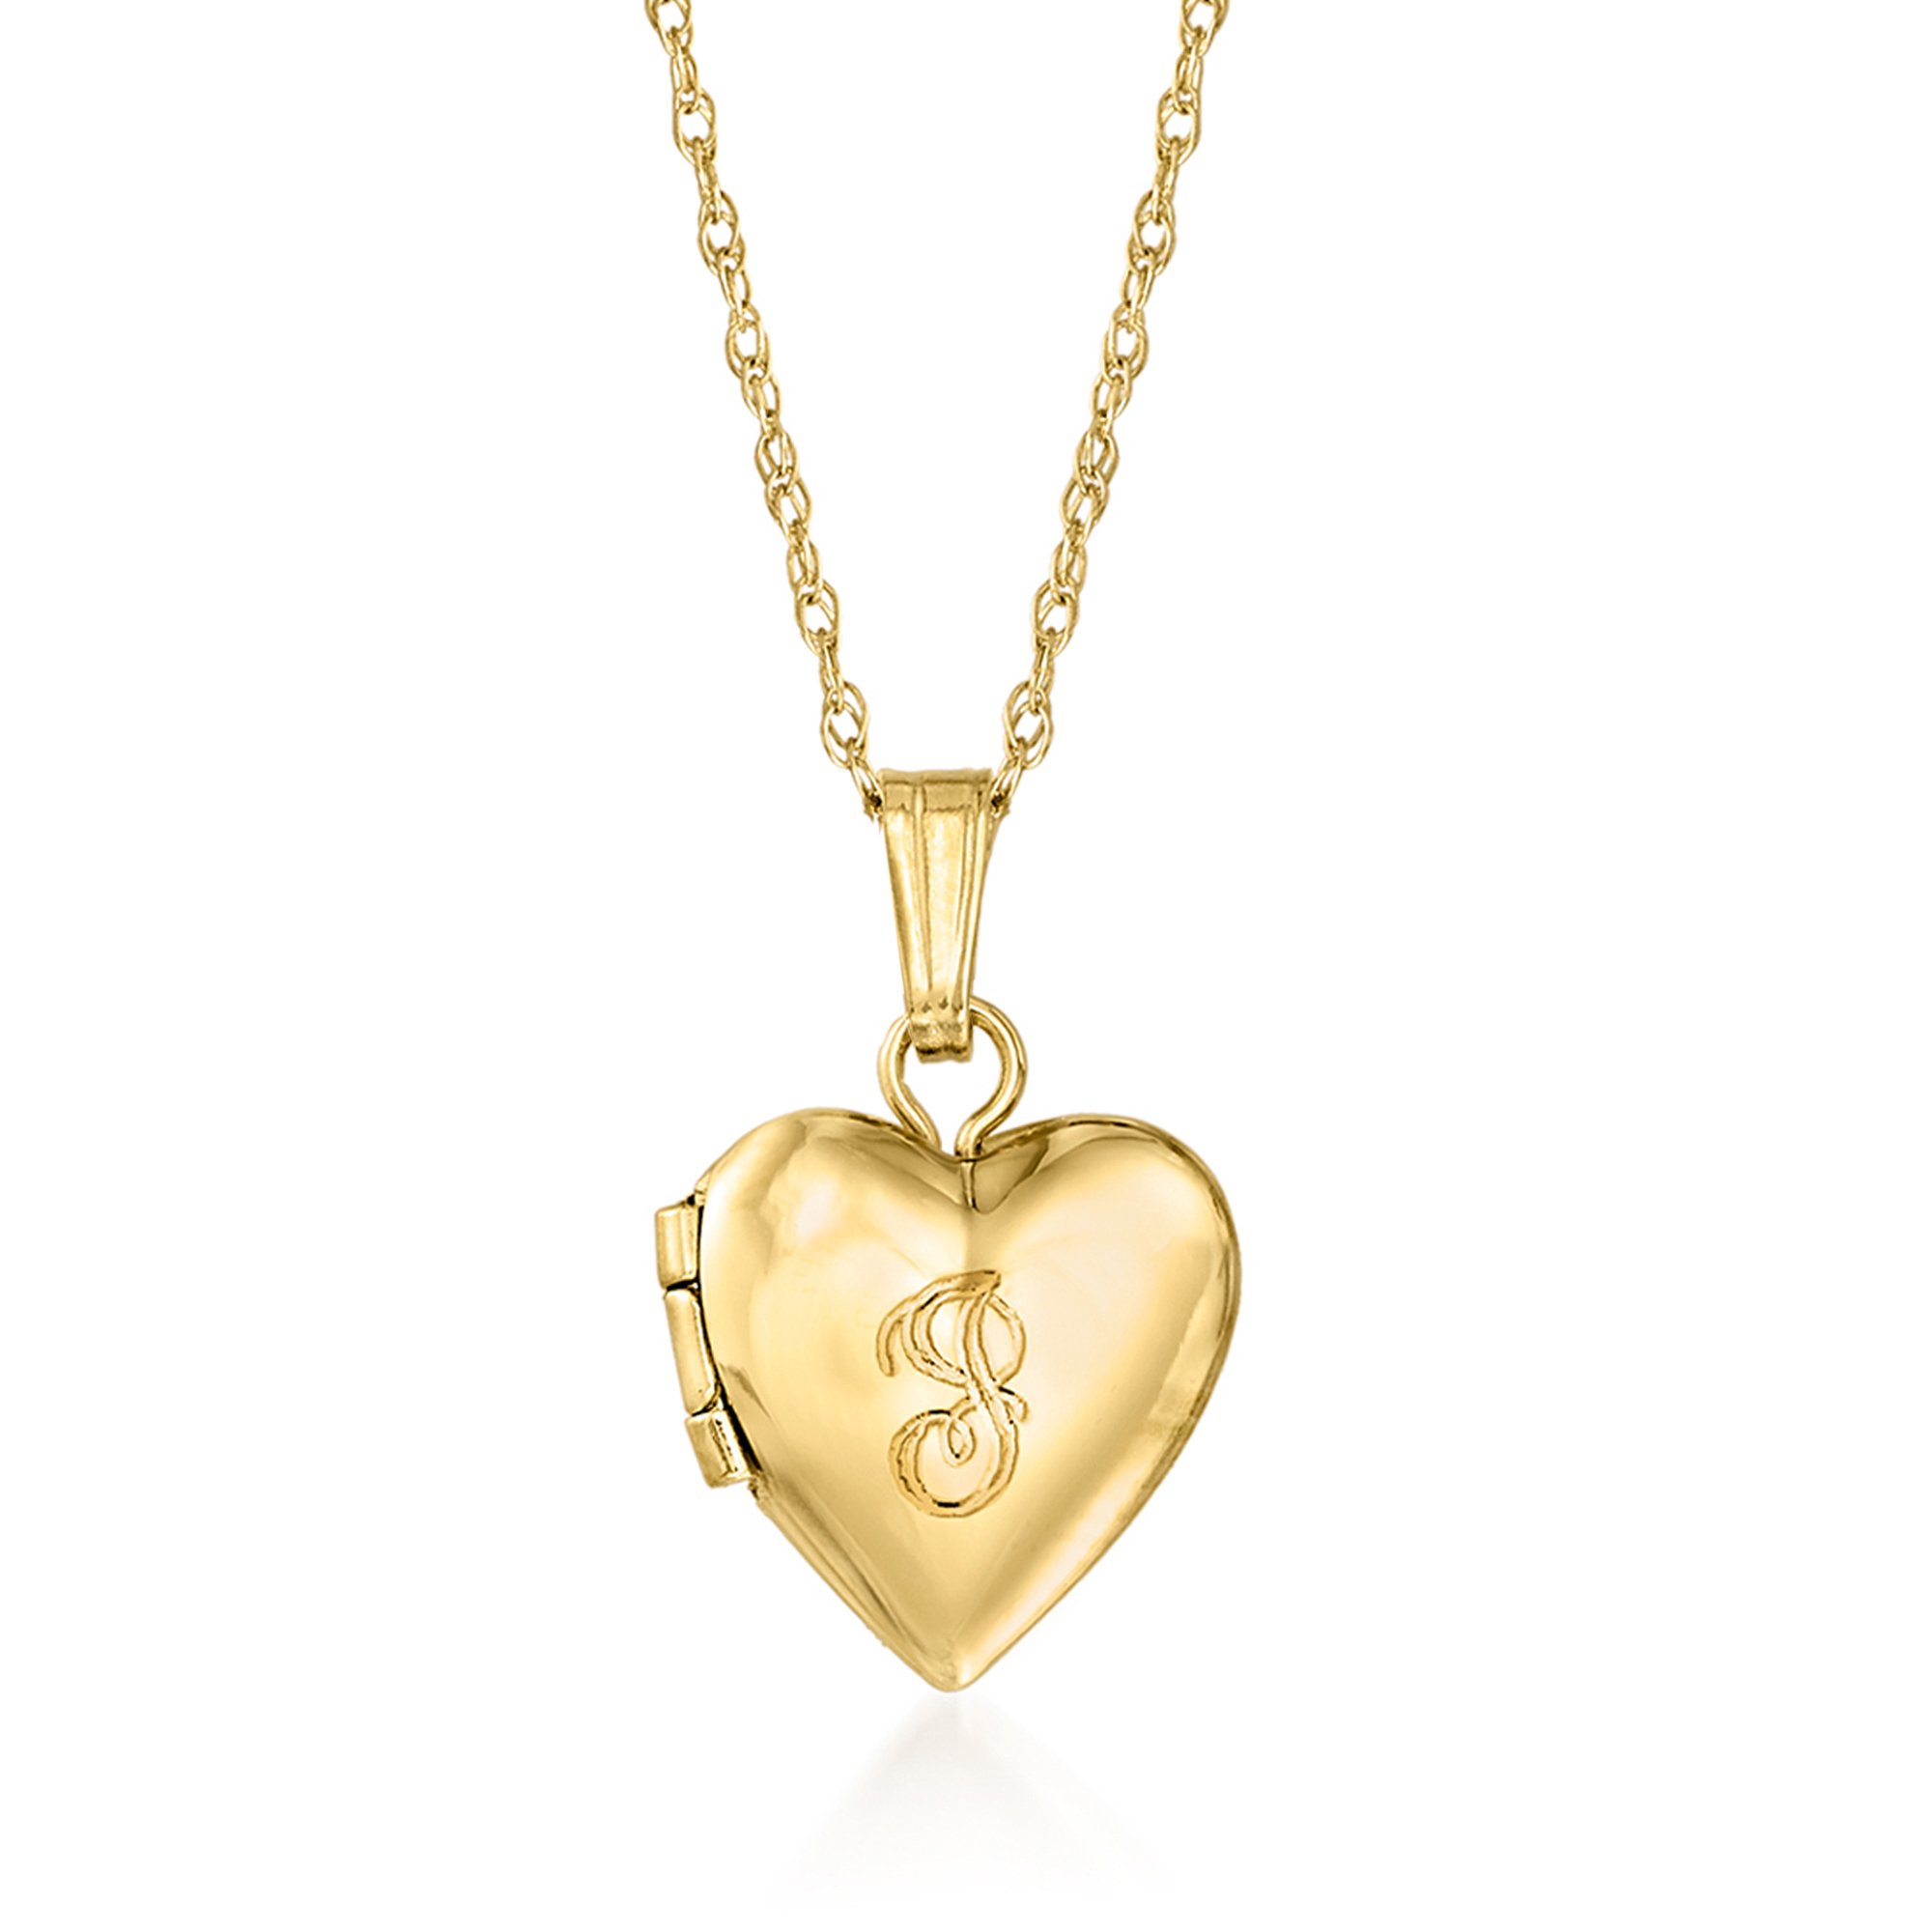 Baby's 14kt Yellow Gold Personalized Heart Locket Necklace | Ross-Simons